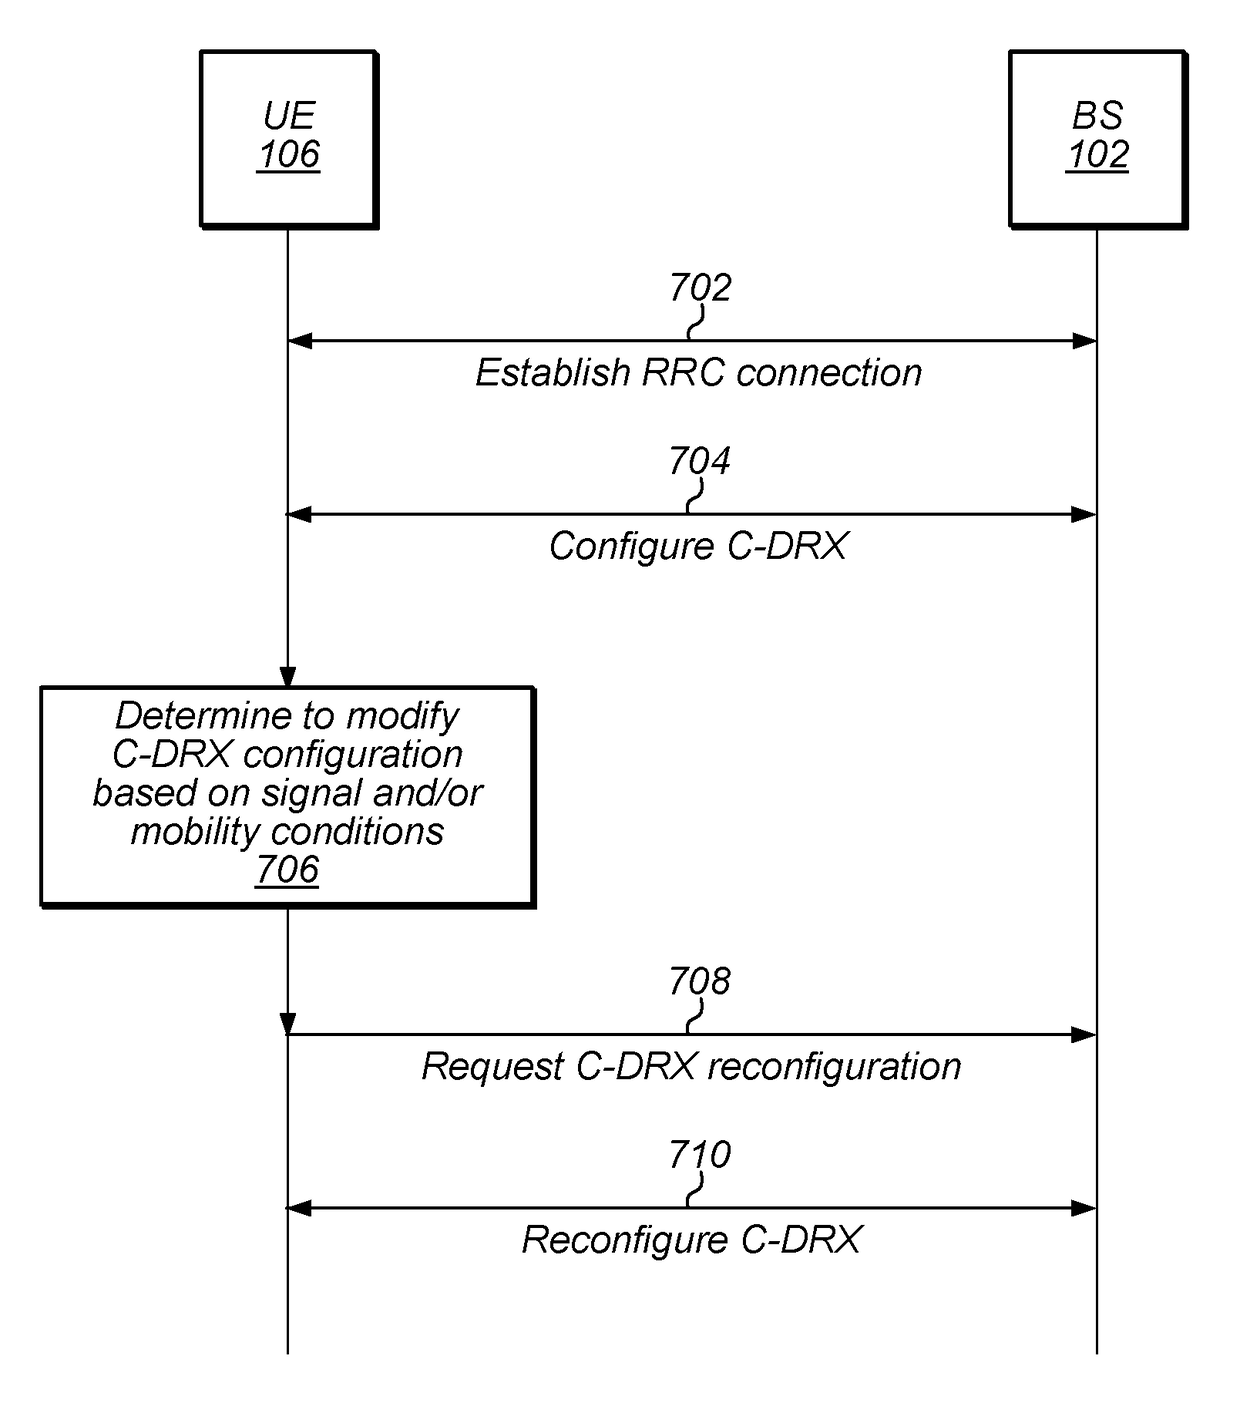 C-DRX modification based on mobility and signal conditions